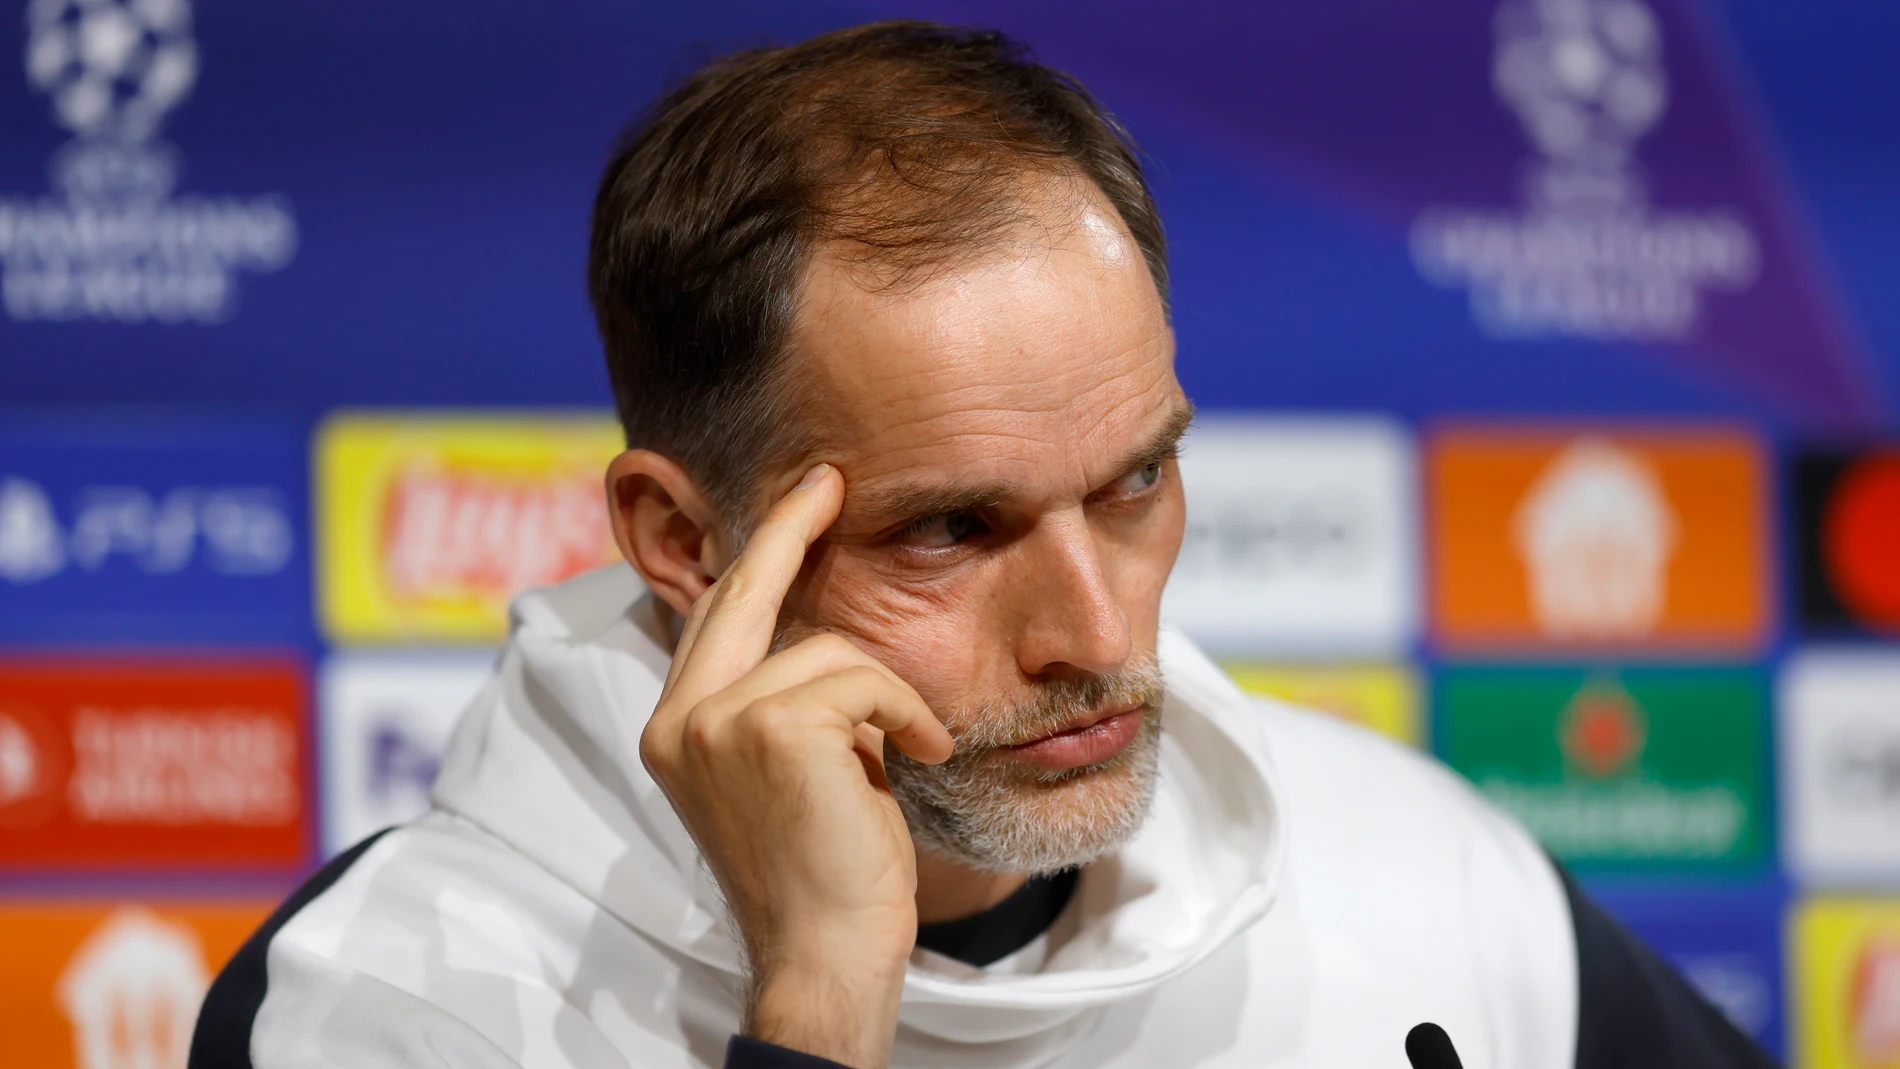 Munich (Germany), 18/04/2023.- Bayern's head coach Thomas Tuchel attends a press conference in Munich, Germany, 18 April 2023. FC Bayern Munich will face Manchester City in their UEFA Champions League quarterfinal second leg soccer match on 19 April 2023 in Munich. (Liga de Campeones, Alemania) EFE/EPA/RONALD WITTEK 